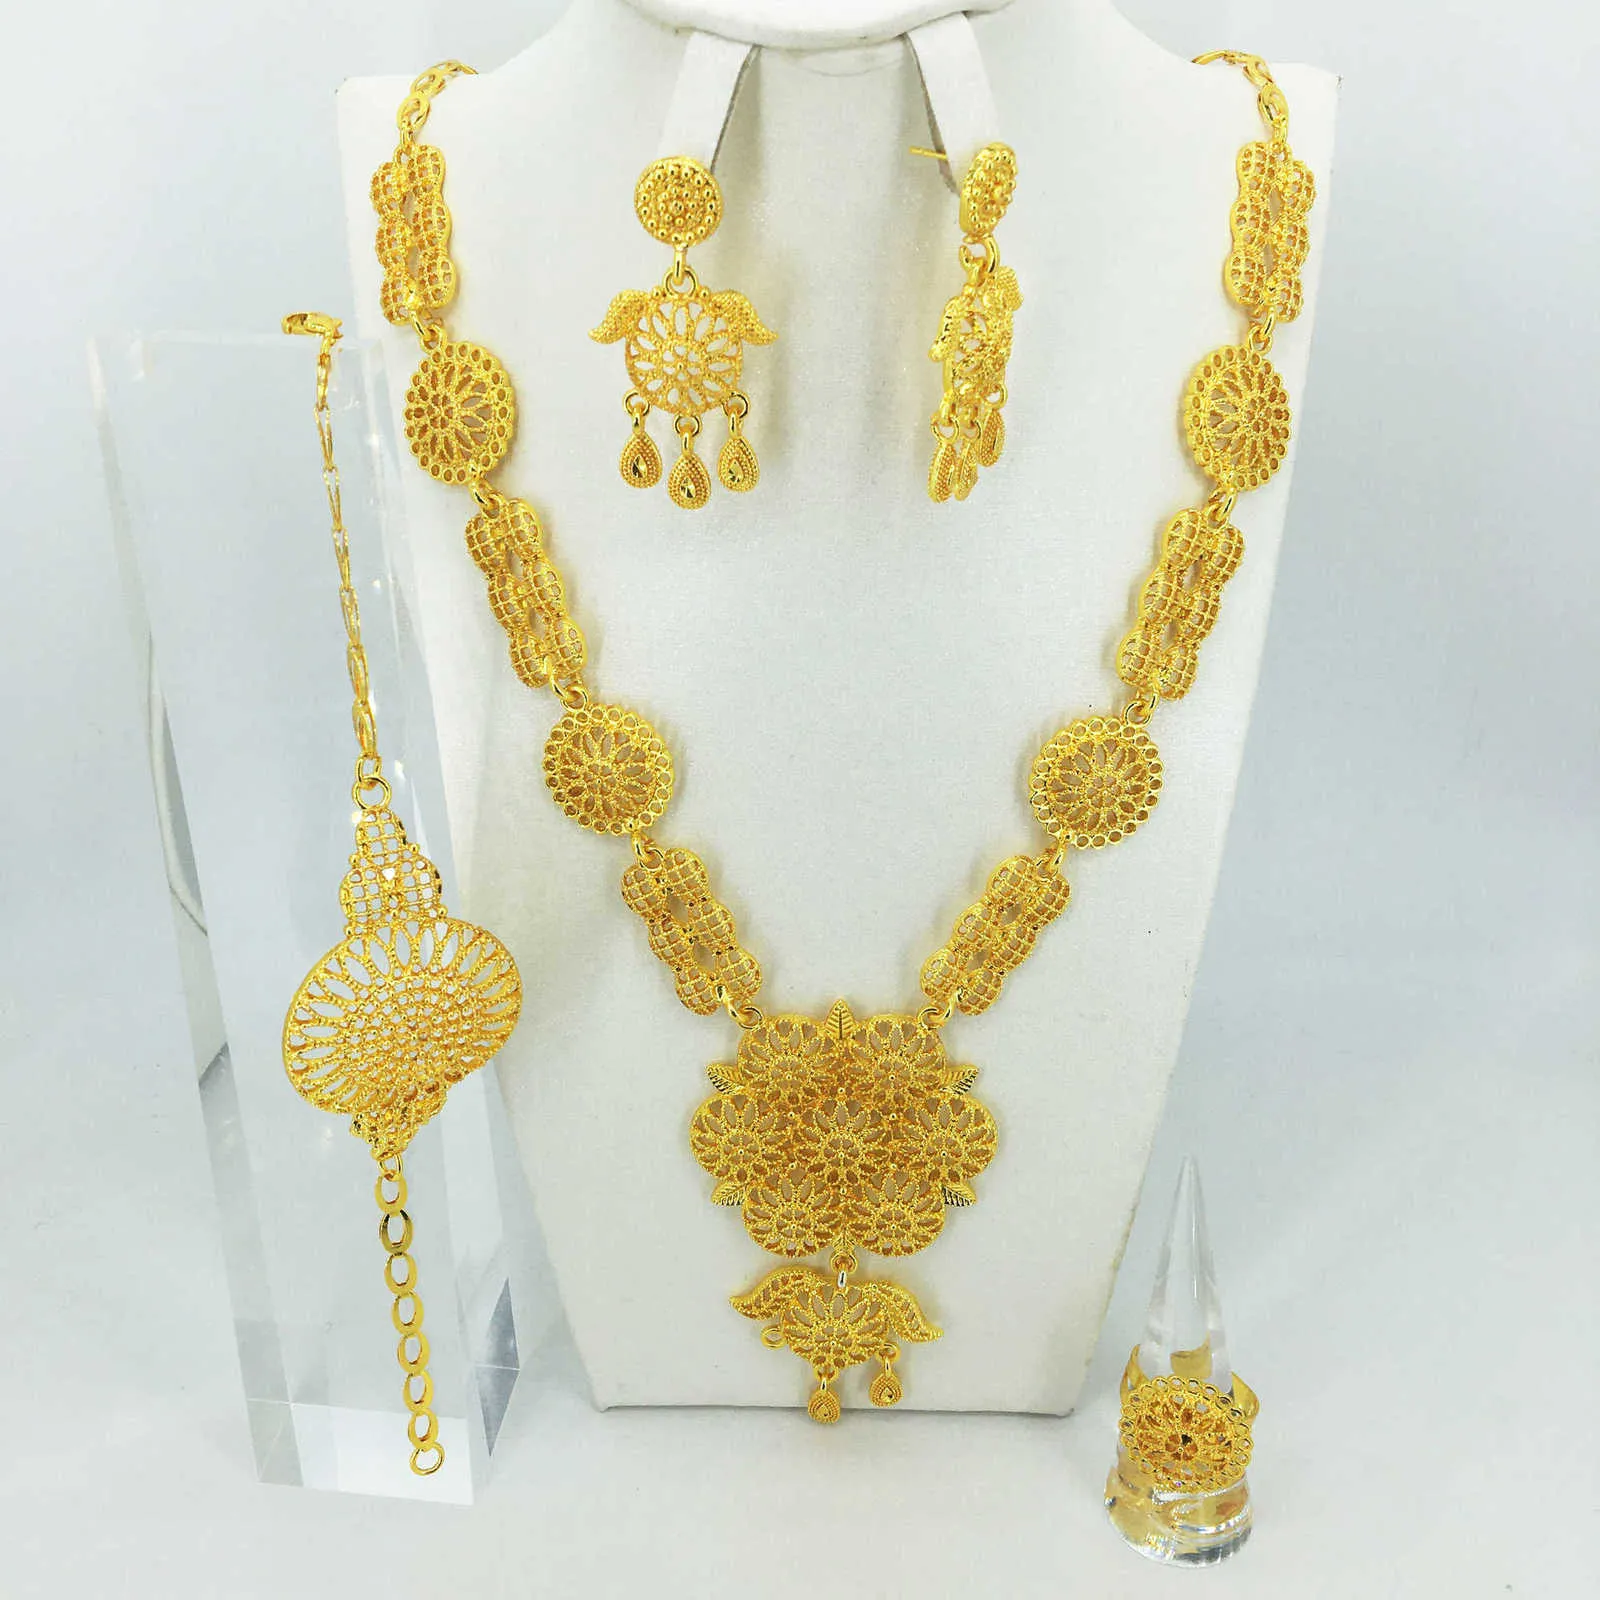 Fashion Wedding Bridal Crystal Jewelry Sets African Beads Dubai Gold Color Statement Jewellery Costume 2110153741469